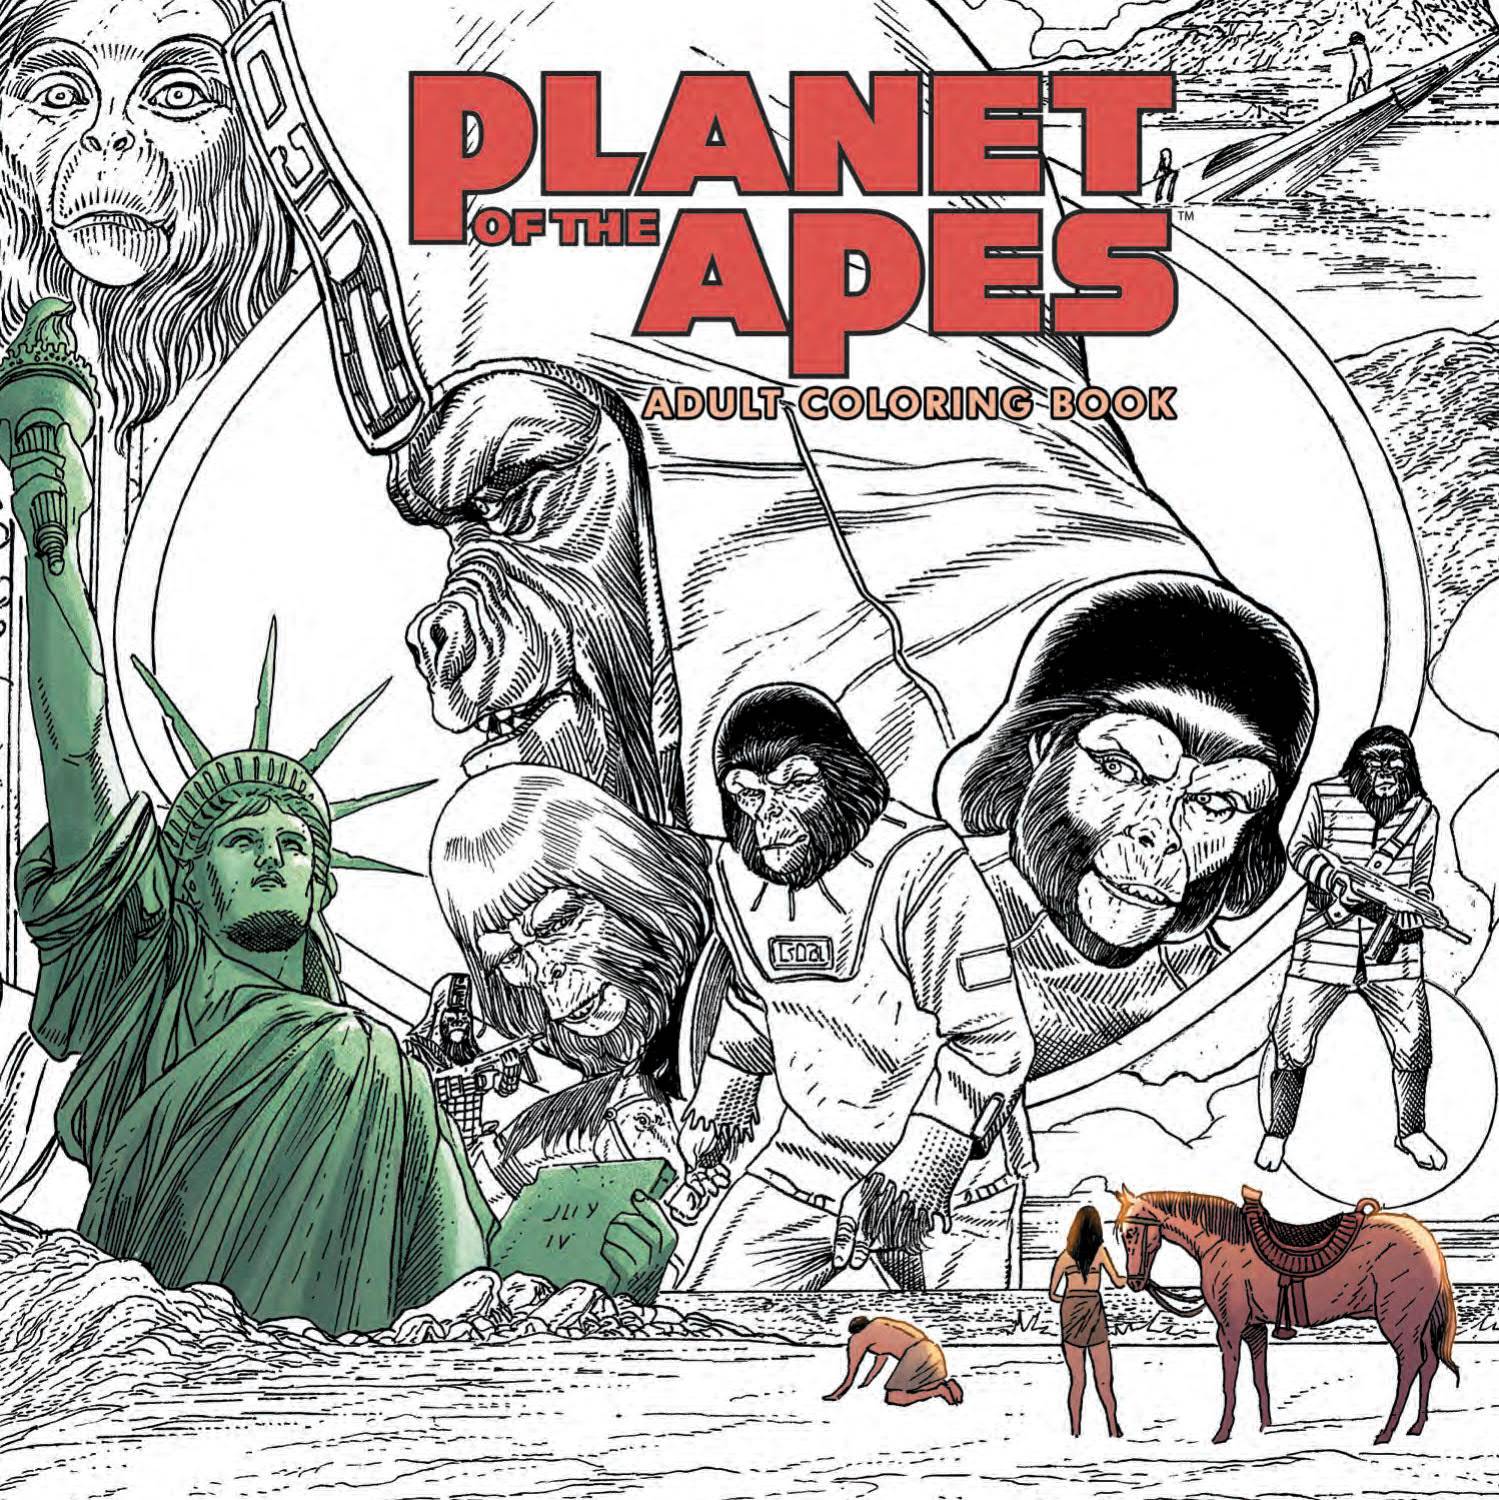 PLANET OF THE APES ADULT COLORING BOOK SC